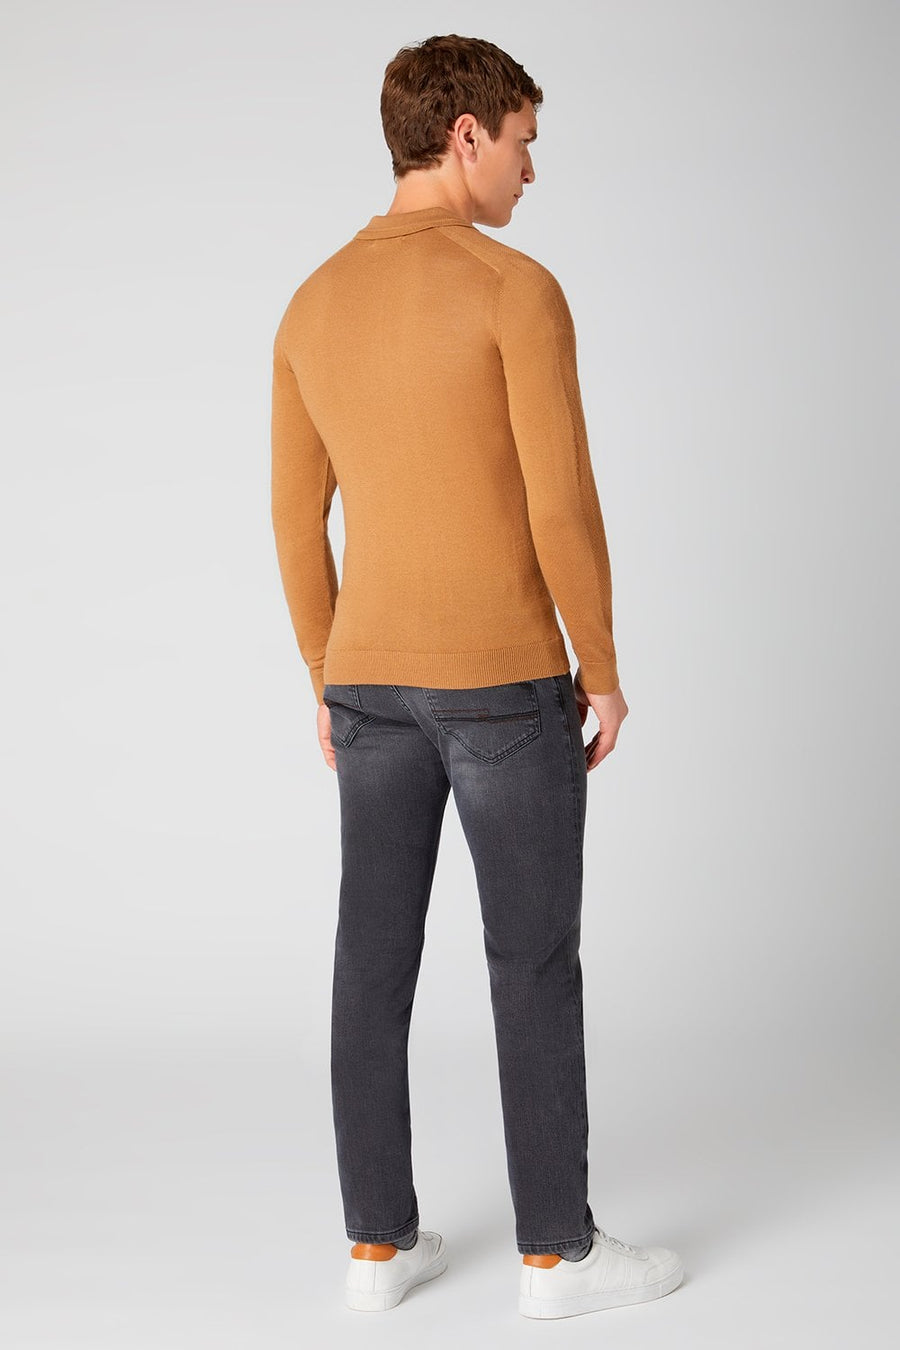 Buy the Remus Uomo 58755 Knitwear in Camel at Intro. Spend £50 for free UK delivery. Official stockists. We ship worldwide.